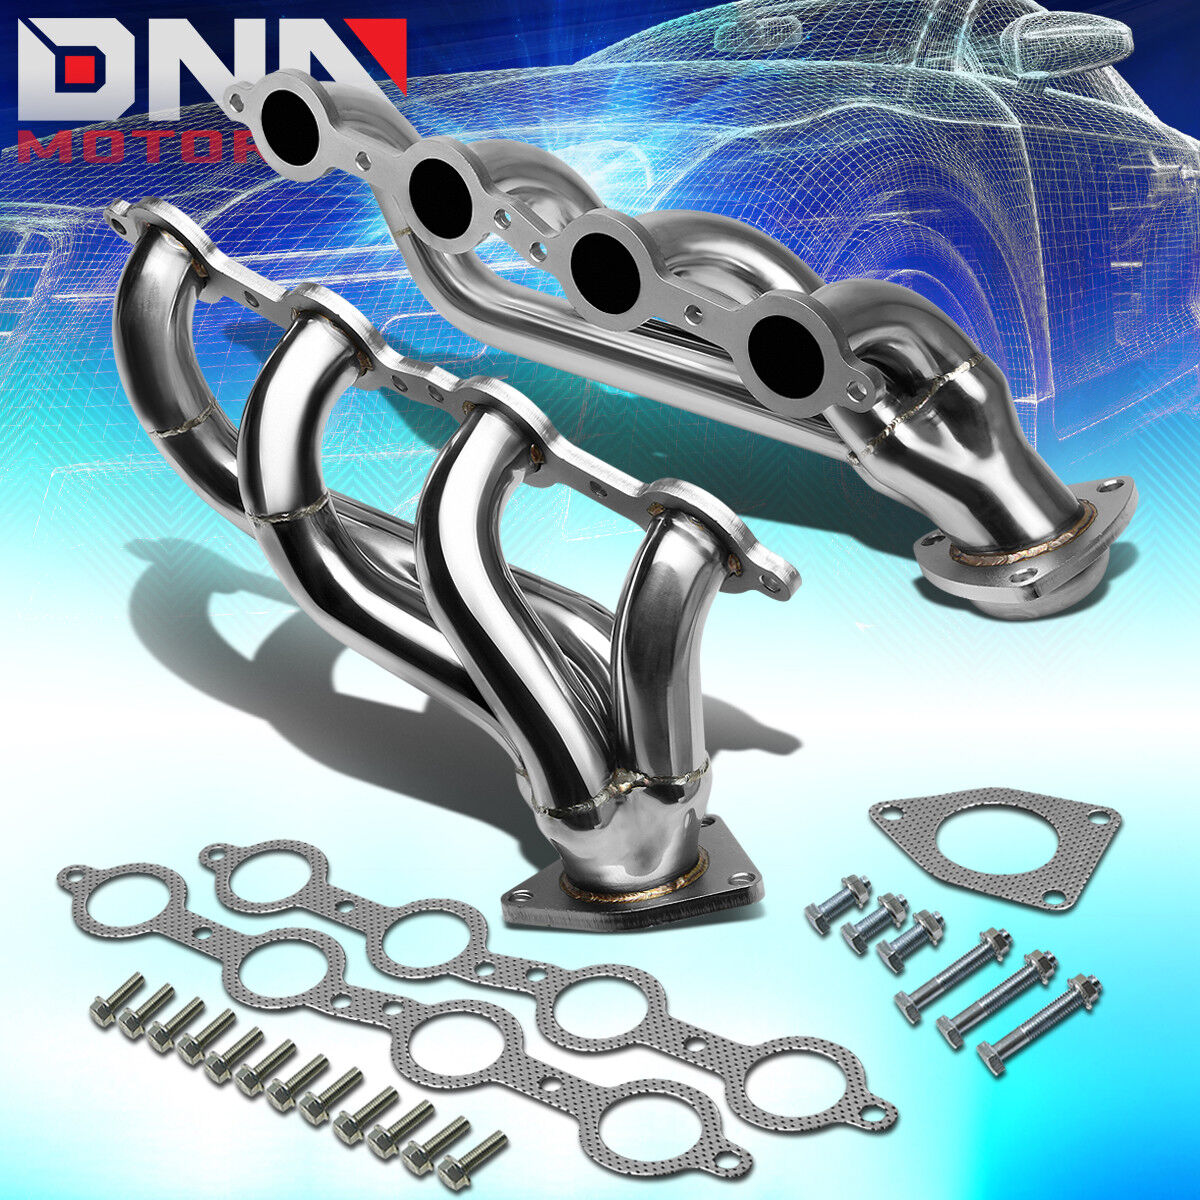 FOR 2002-2013 ESCALADE/HUMMER H2 STAINLESS STEEL RACING EXHAUST HEADER MANIFOLD